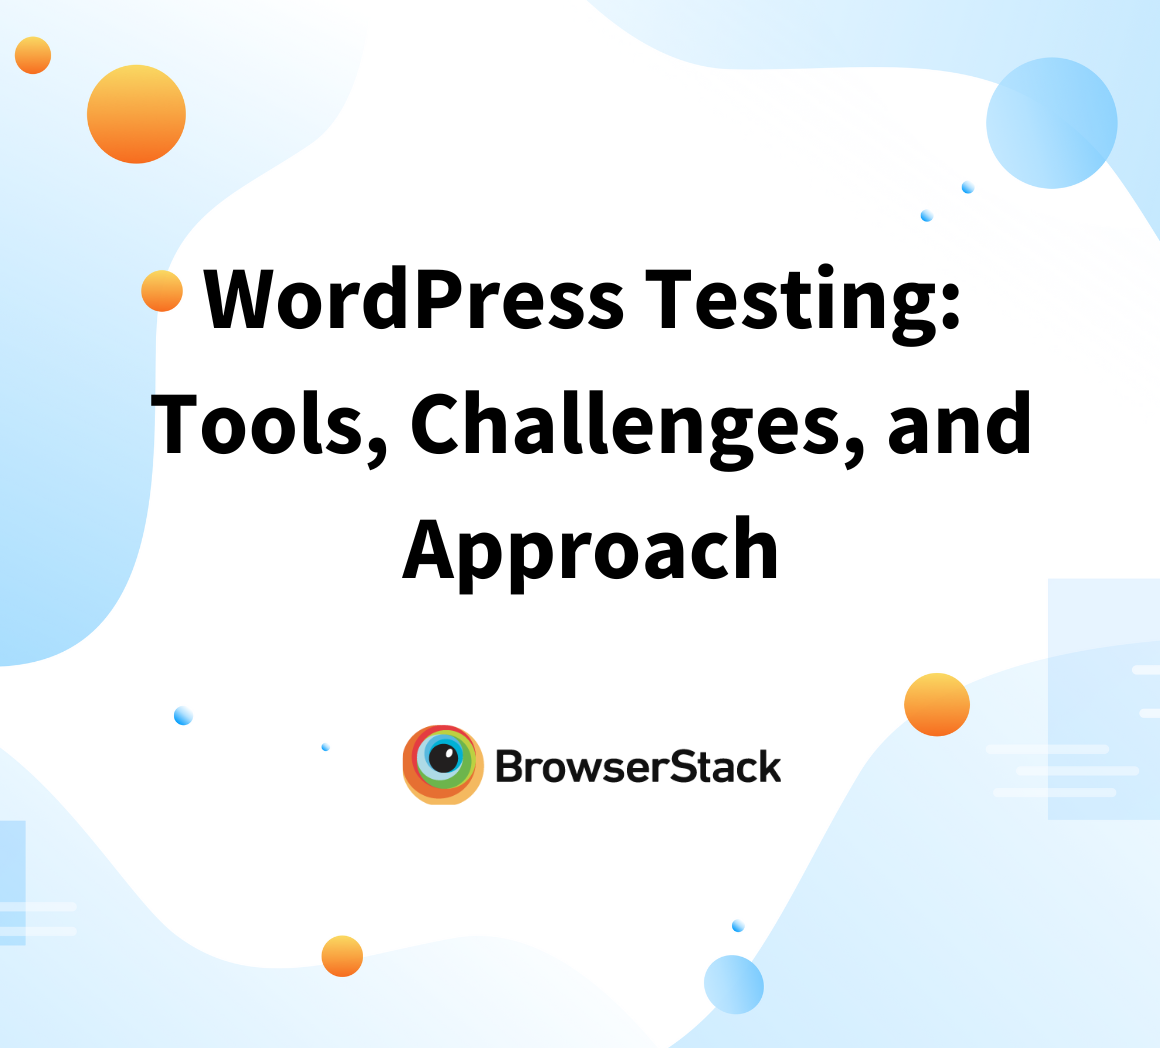 WordPress Testing Tools, Challenges, and Approach